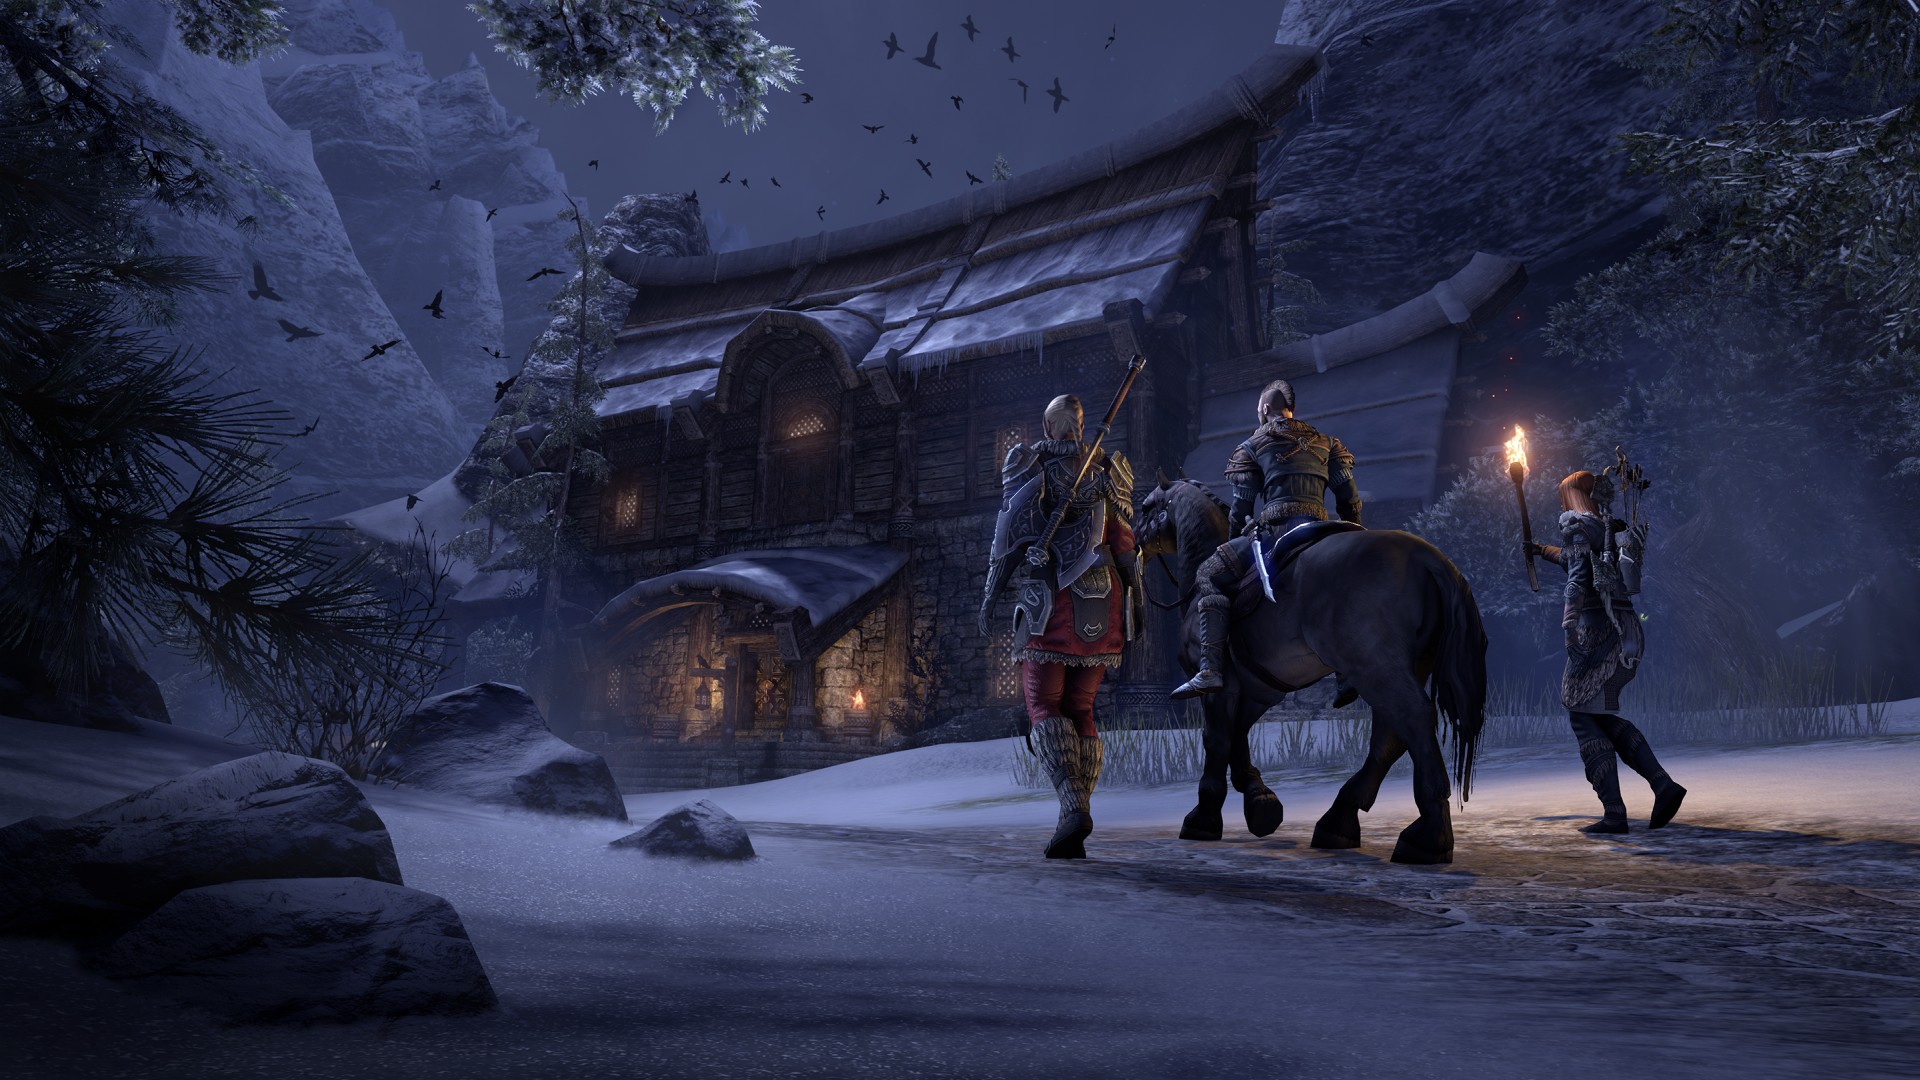 Video For Uncover the Dark Heart of Skyrim with the Prologue Questline in The Elder Scrolls Online